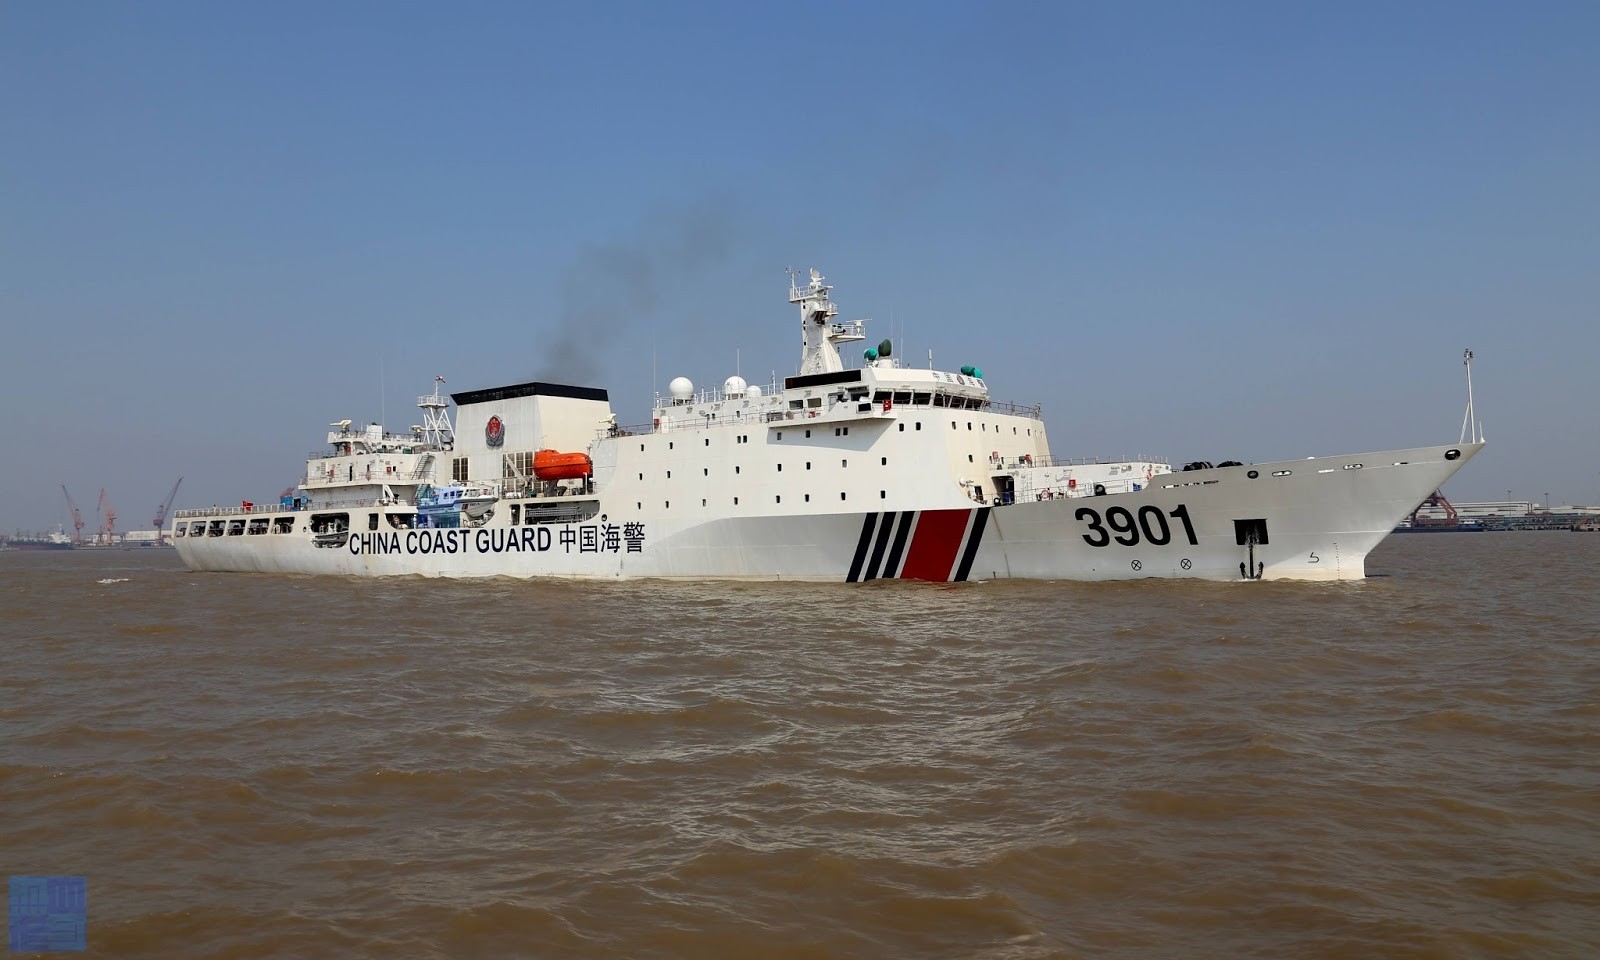 The deployment of Haijing 3901, one of the world’s largest coastguard vessels, showed Beijing’s willingness to use maritime law enforcement ships to impose its claims. Photo: Handout